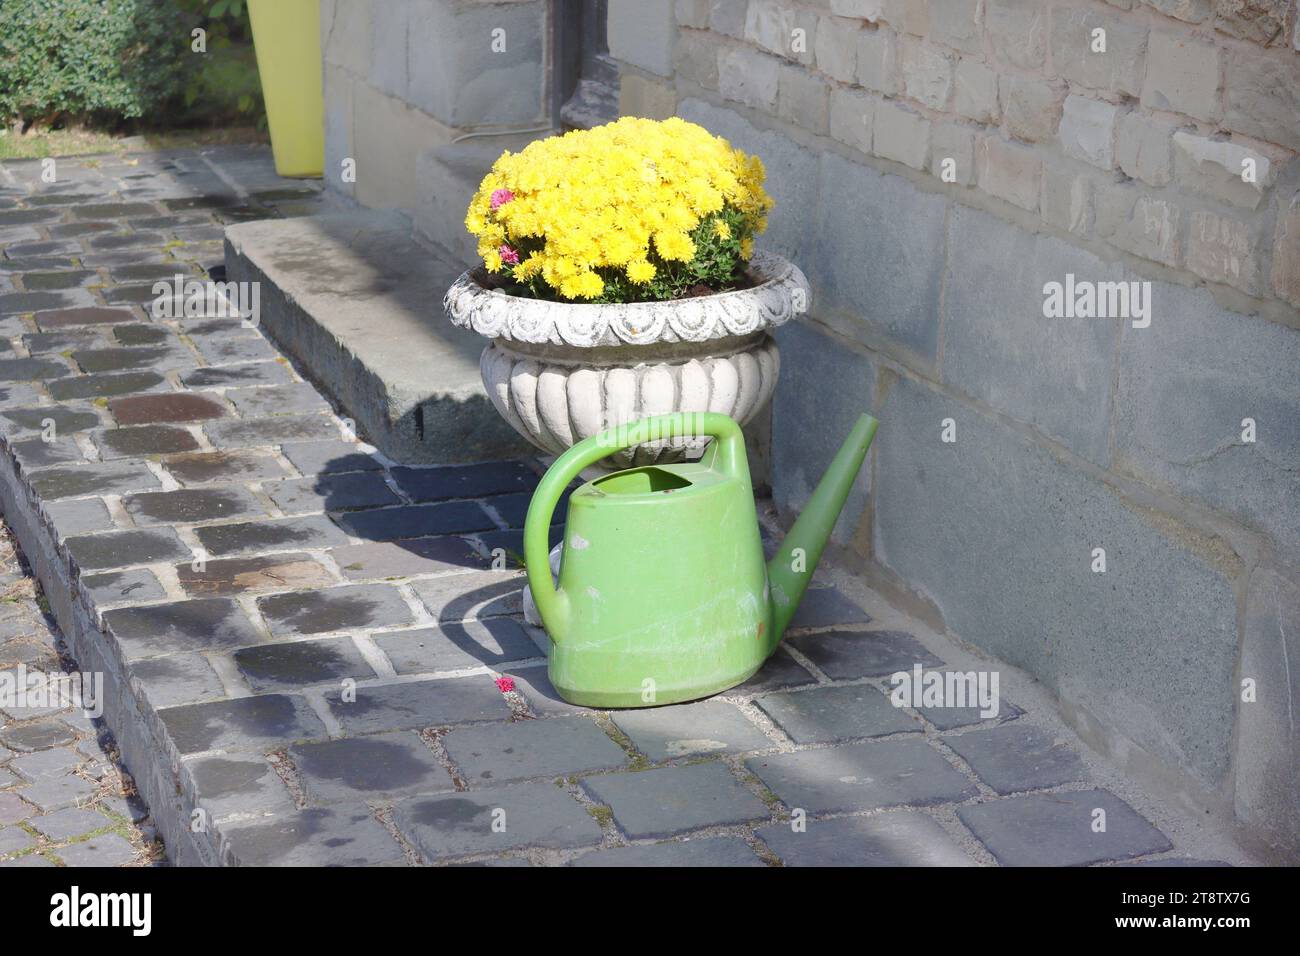 Bright flowers in a vase and watering can in Cantacuzino Castle, Busteni, Romania Stock Photo